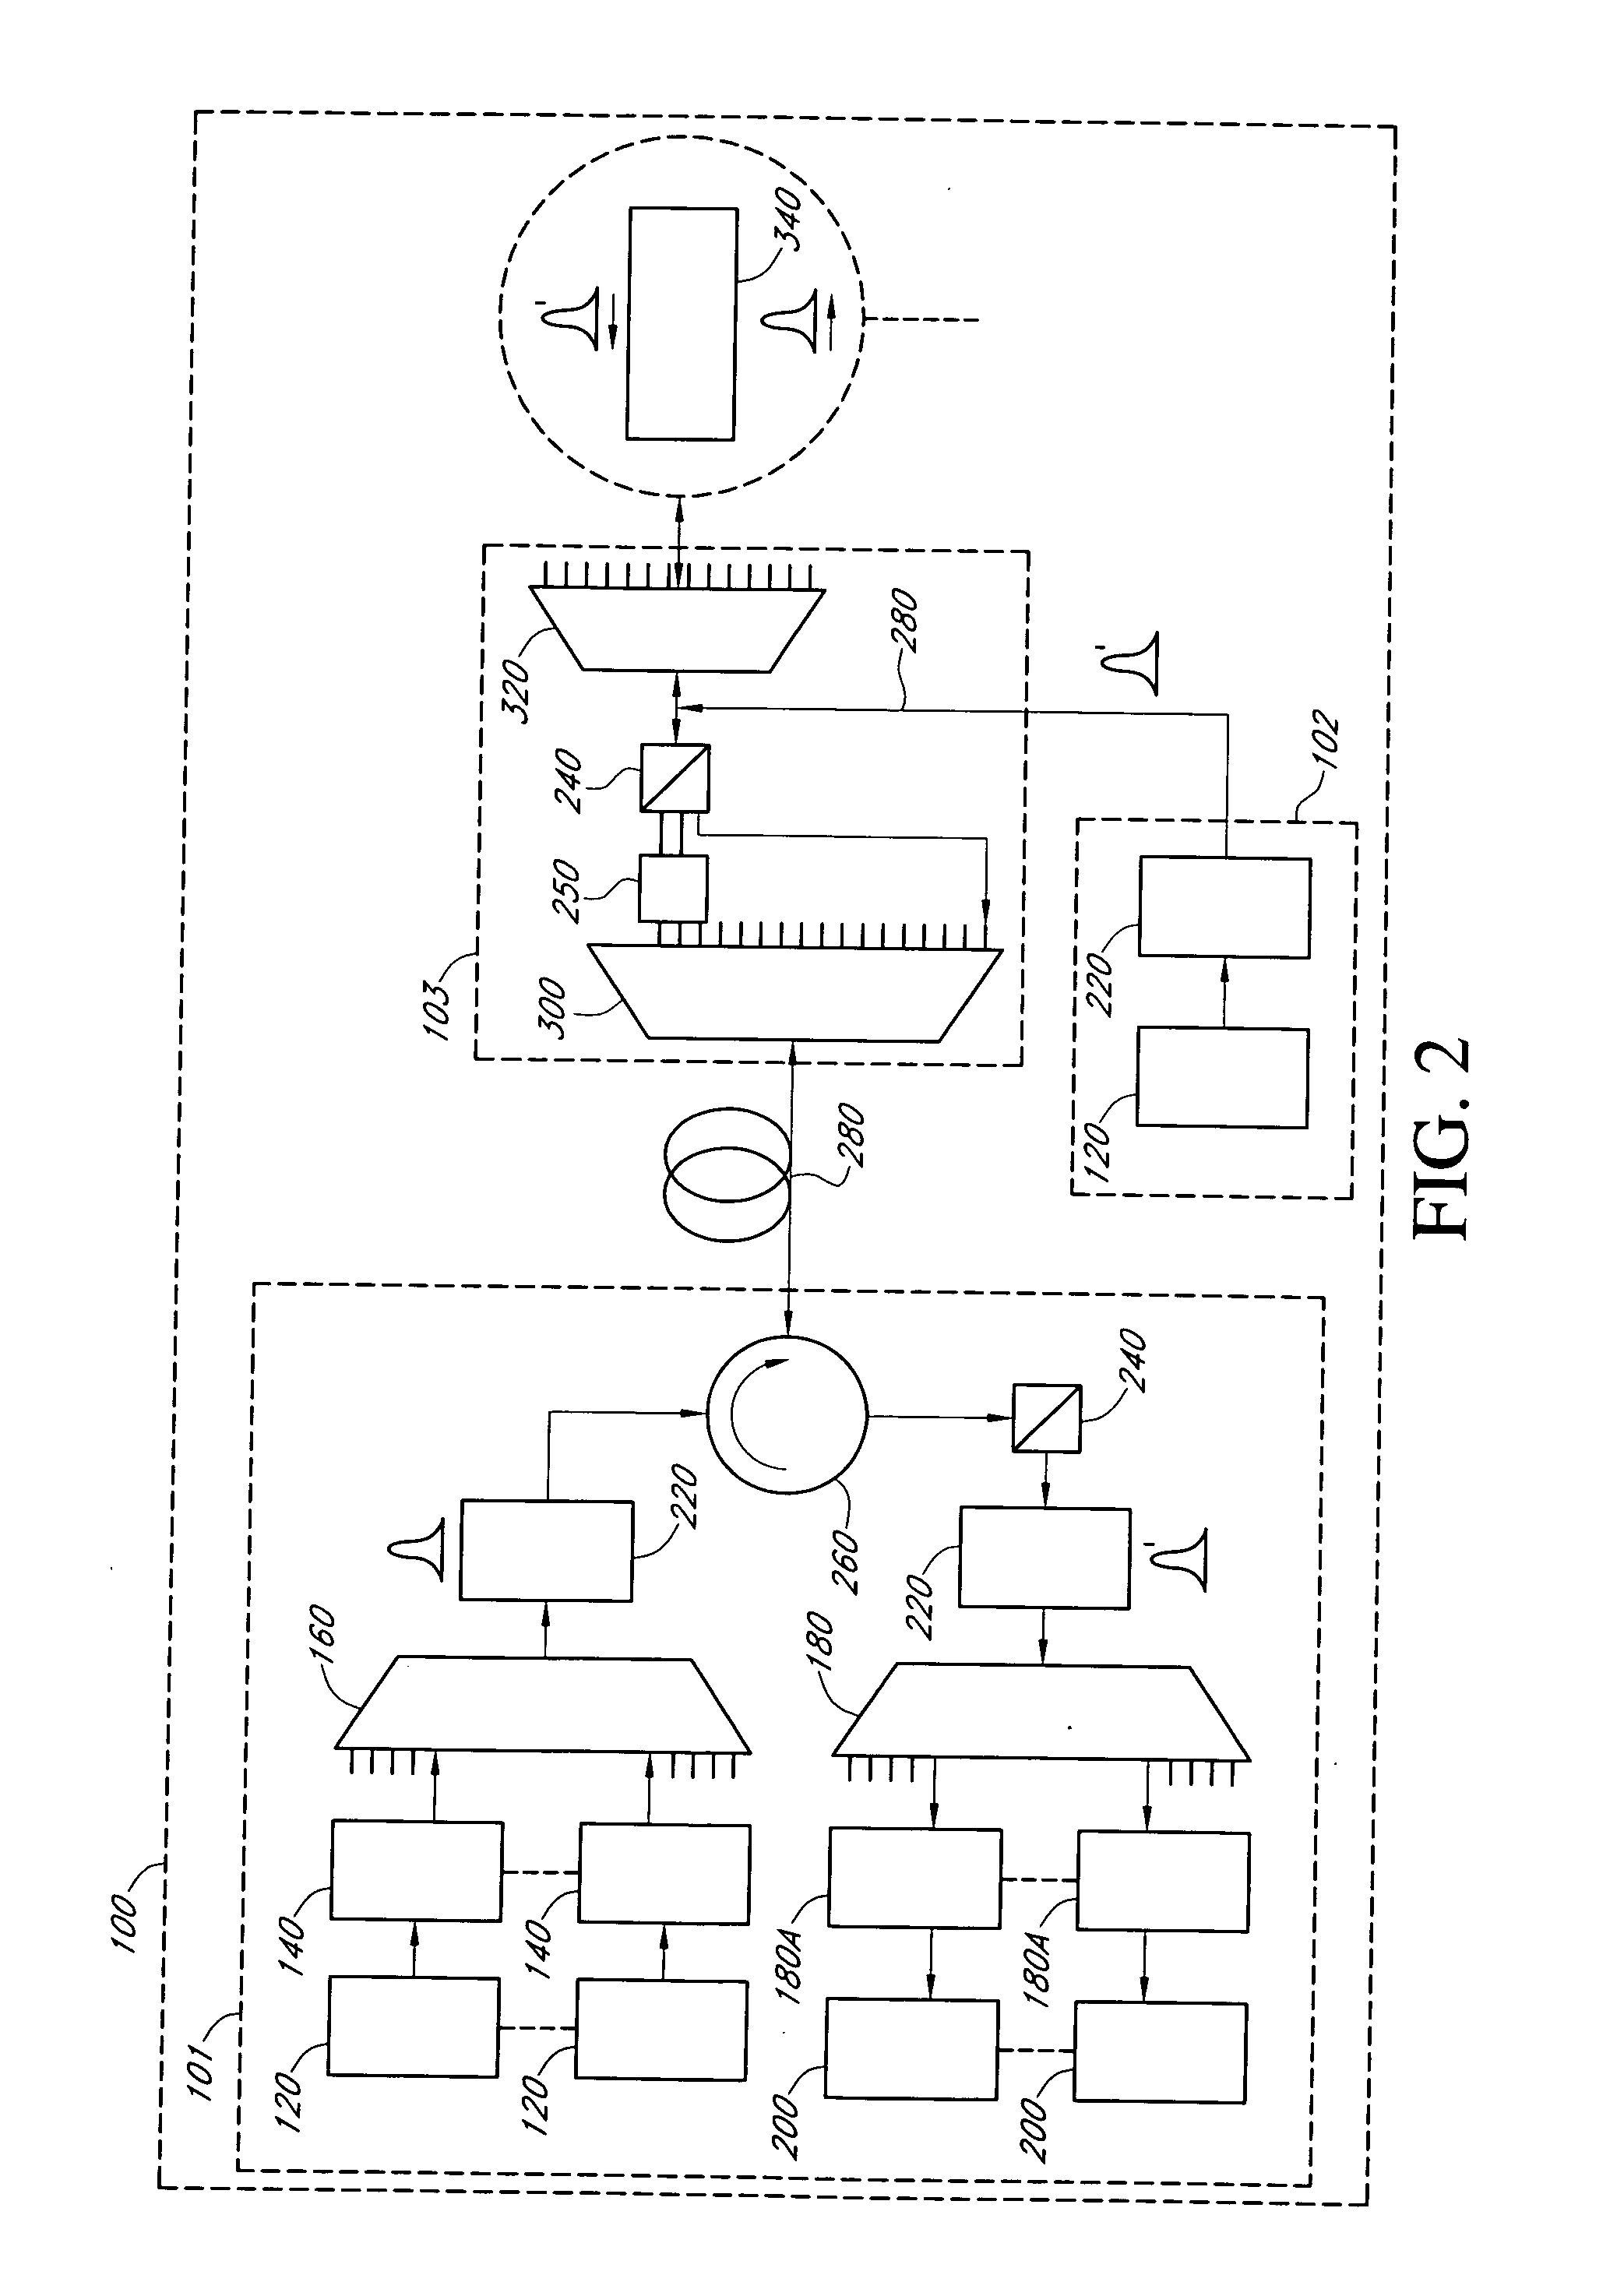 Dynamic intelligent bidirectional optical access communication system with object/intelligent appliance-to-object/intelligent appliance interaction